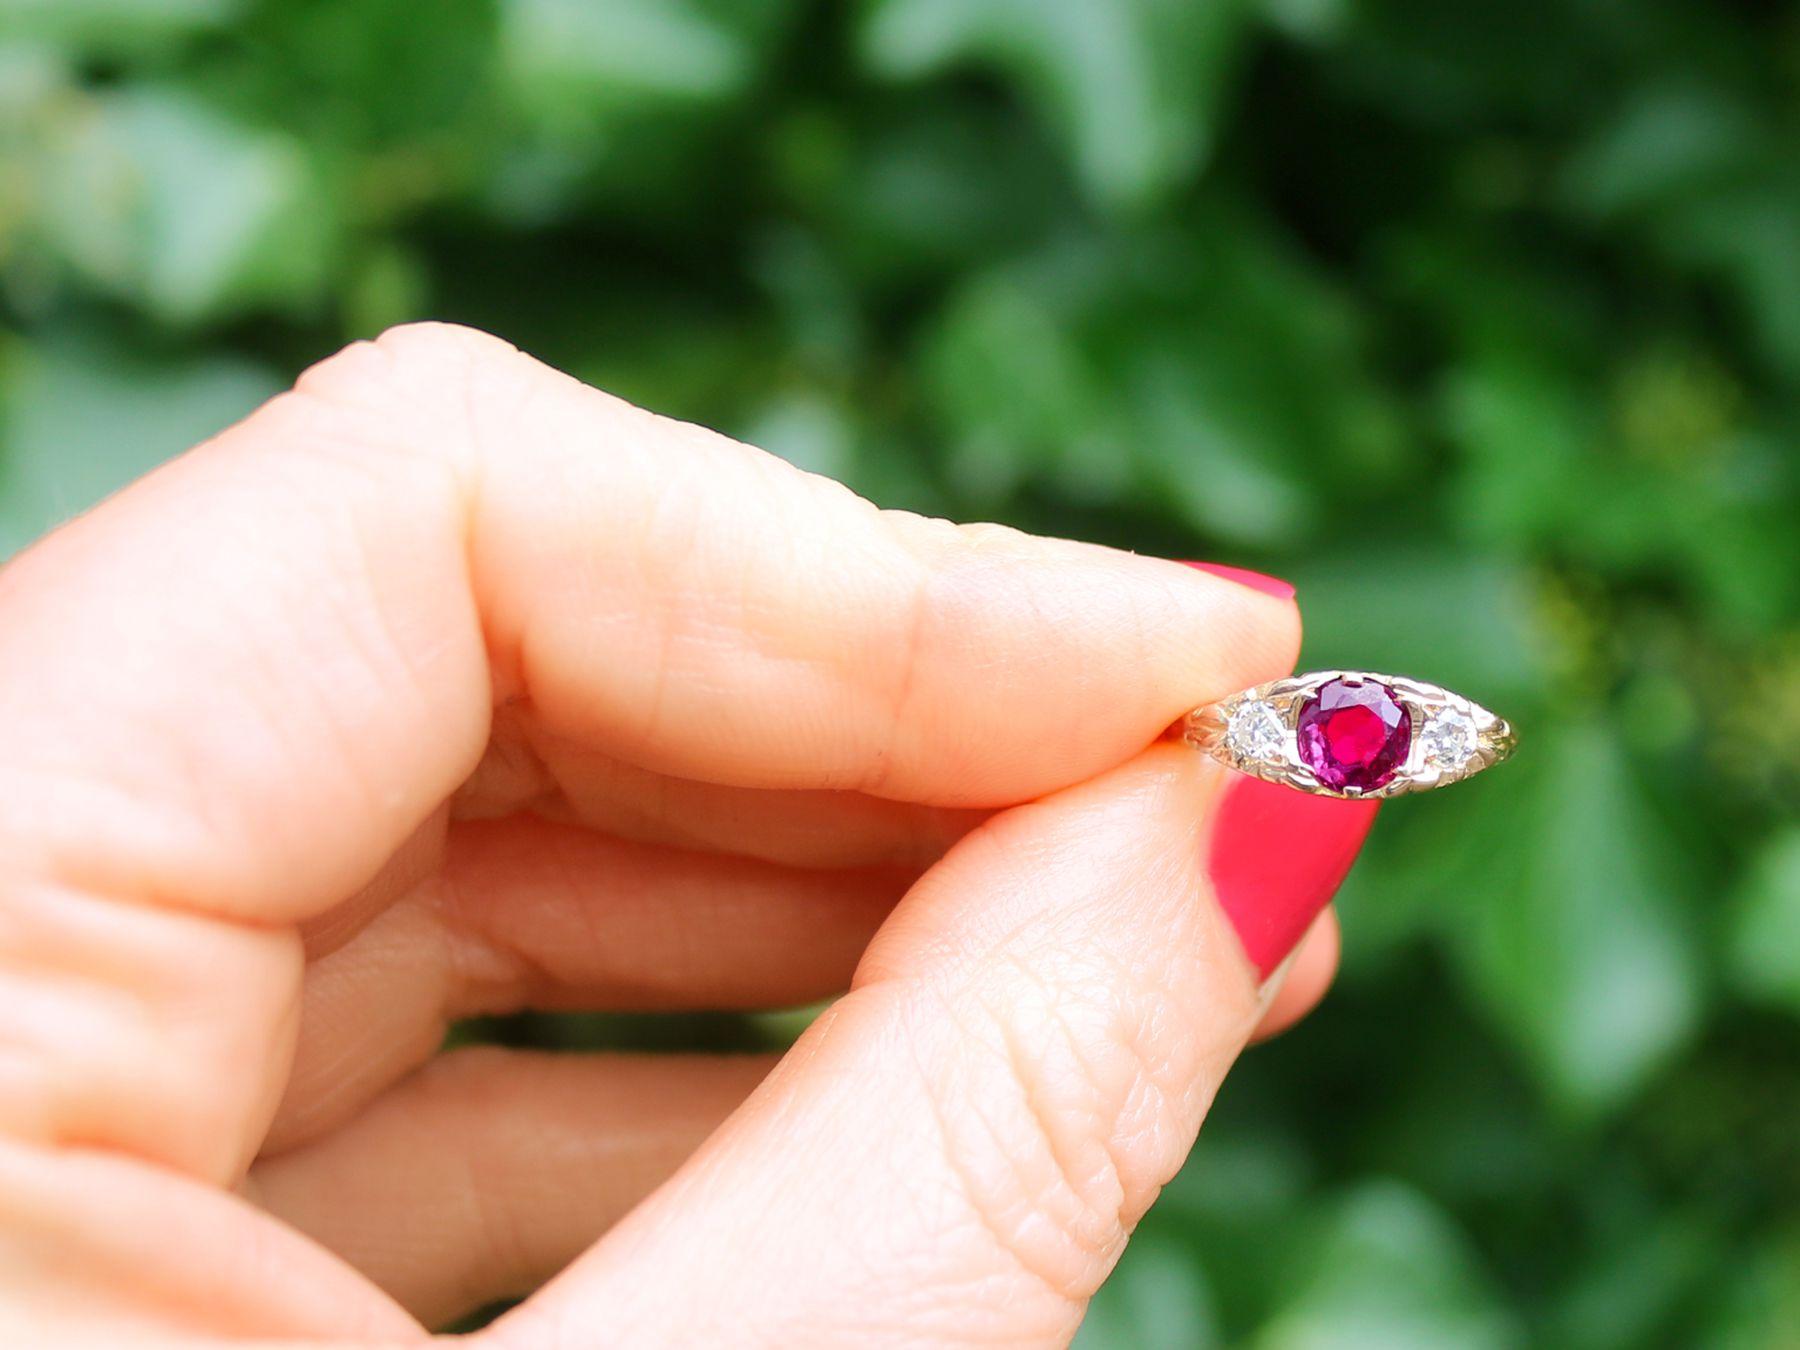 An impressive 0.68 carat ruby and 0.24 carat diamond, 18 karat yellow gold cocktail ring; part of our diverse vintage jewelry and estate jewelry collections.

This fine and impressive 1940s ruby dress ring has been crafted in 18k yellow gold.

The